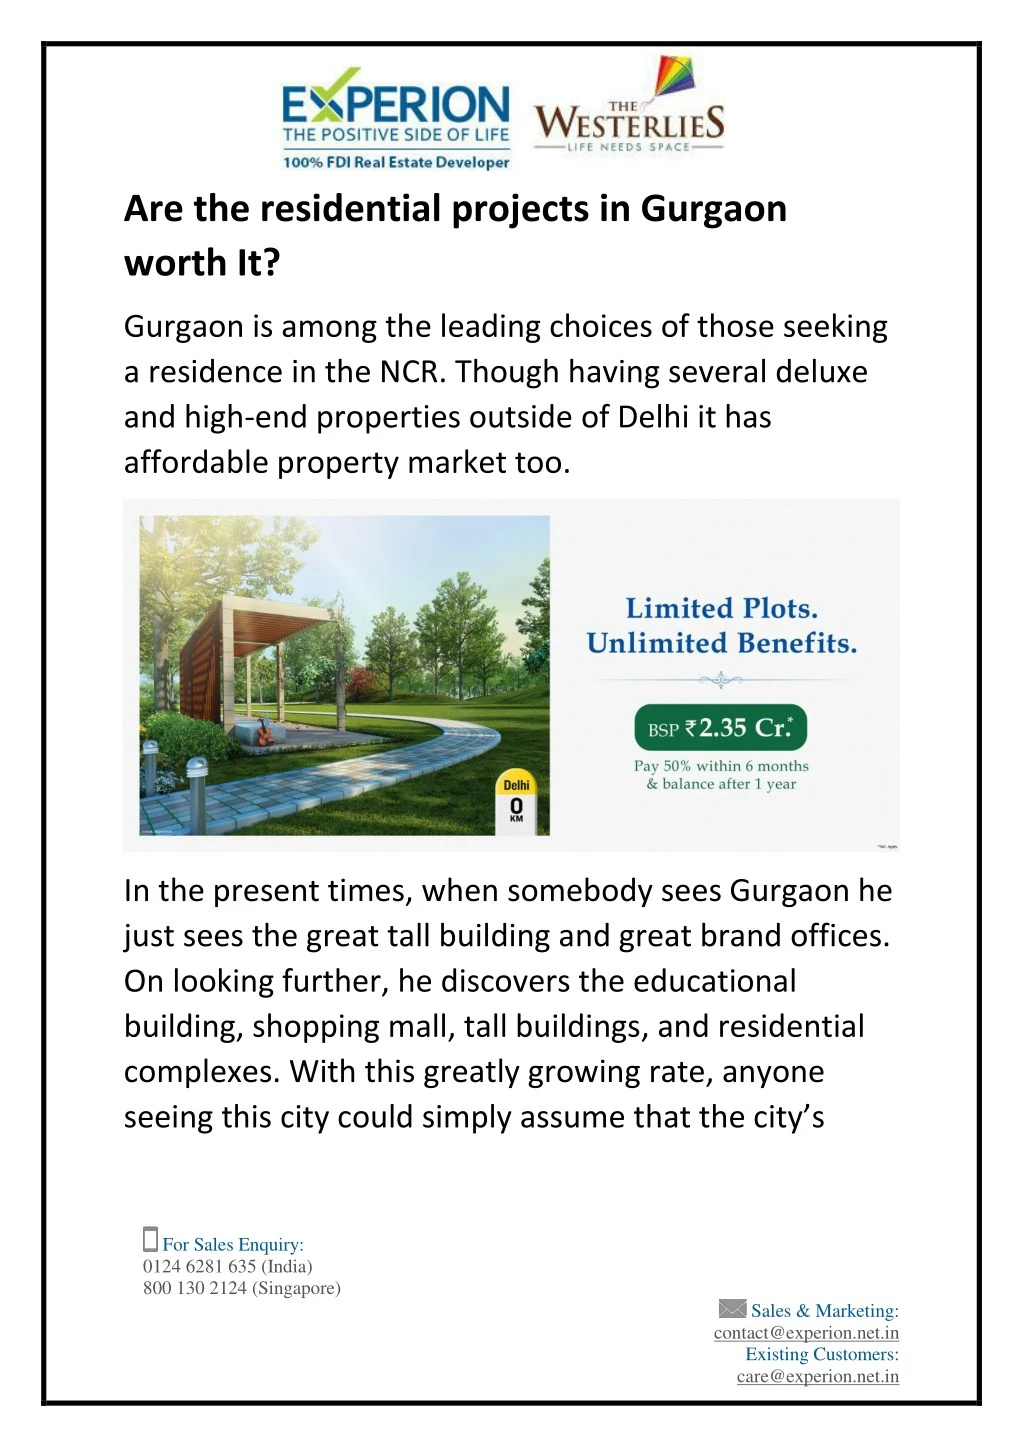 are the residential projects in gurgaon worth it